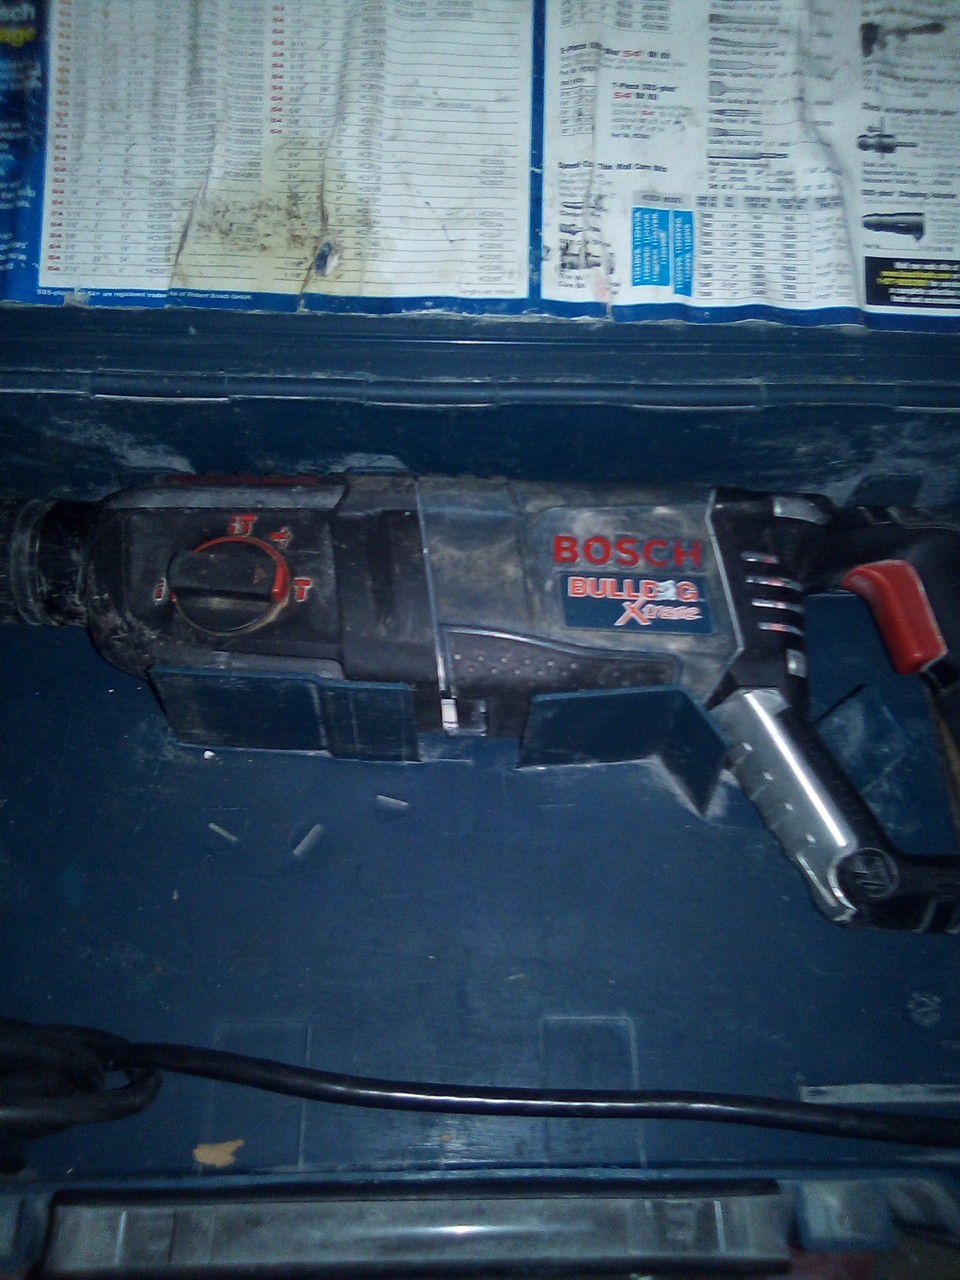 Bosch 8 Amp 1-1/8 in. Corded SDS-Plus Variable Speed Concrete/Masonry Rotary Hammer Drill with Carrying Case )